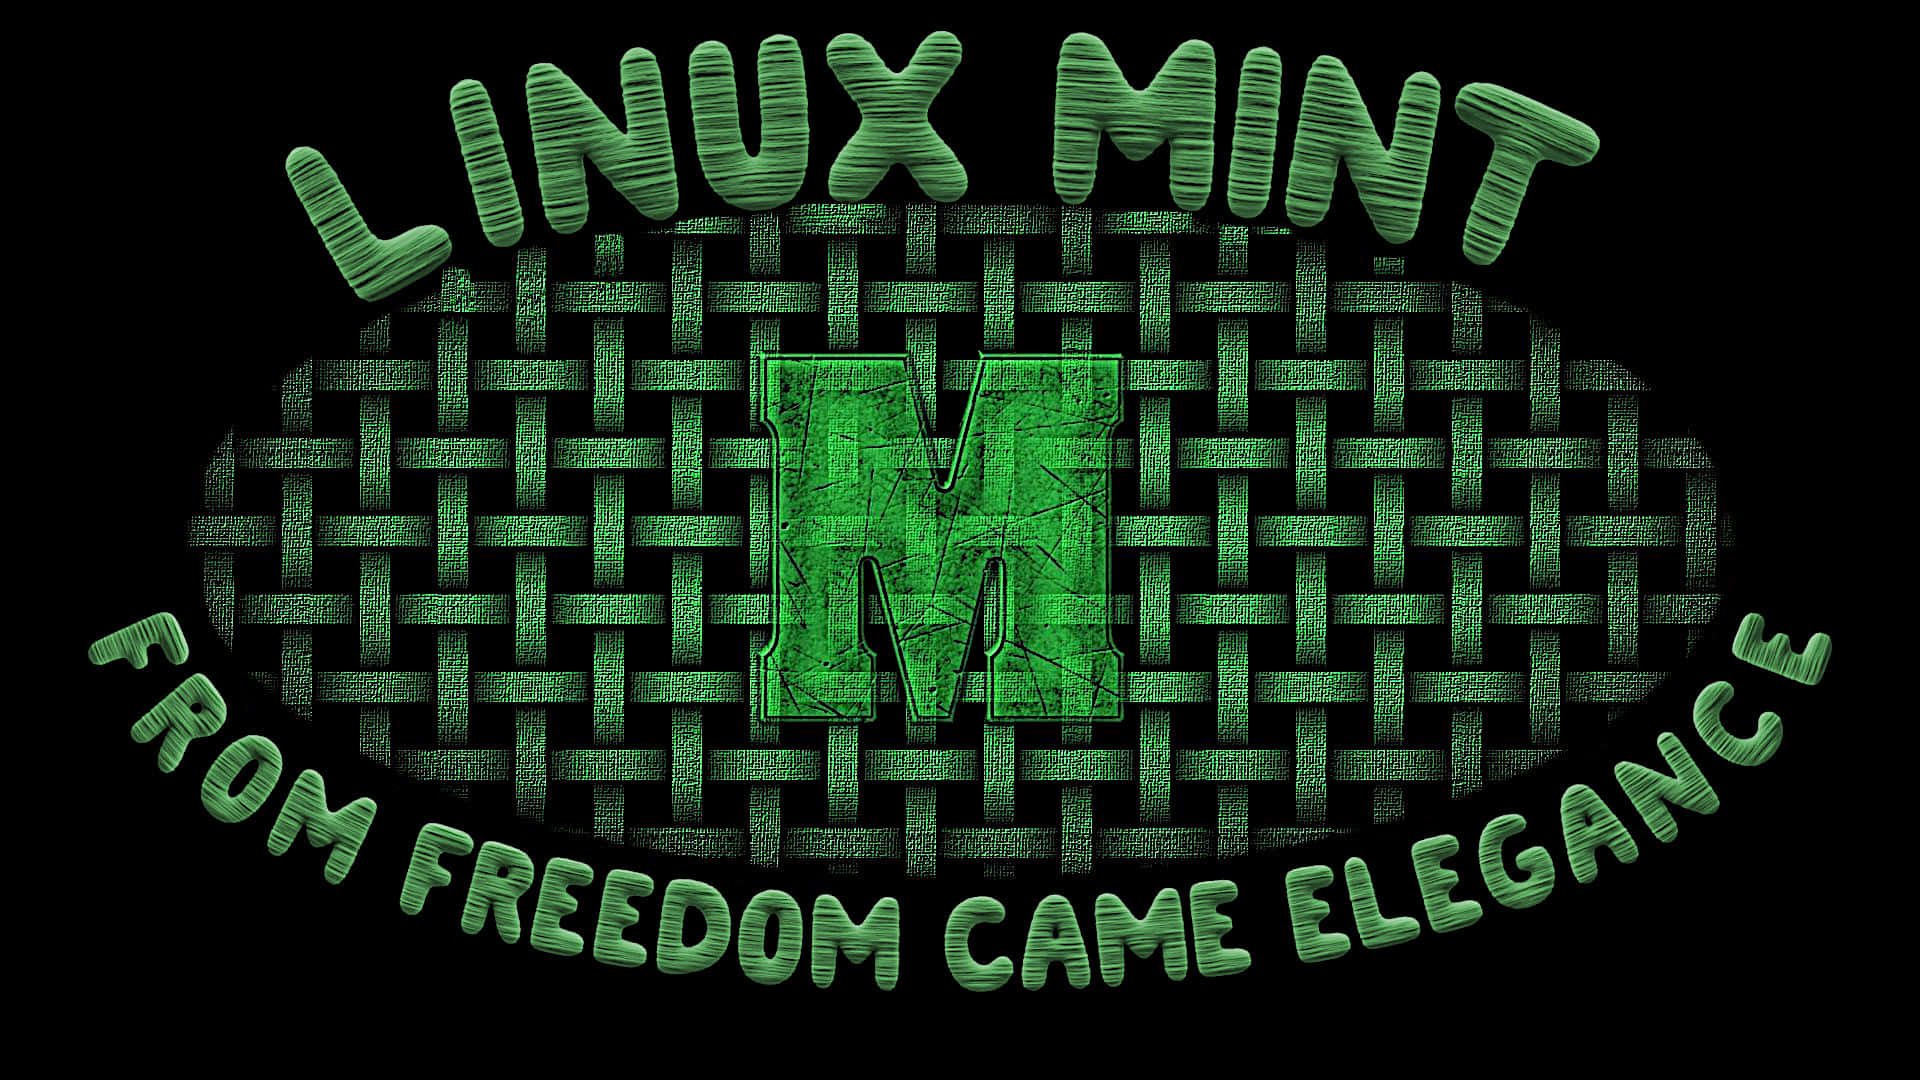 Enjoy the open source power of Linux